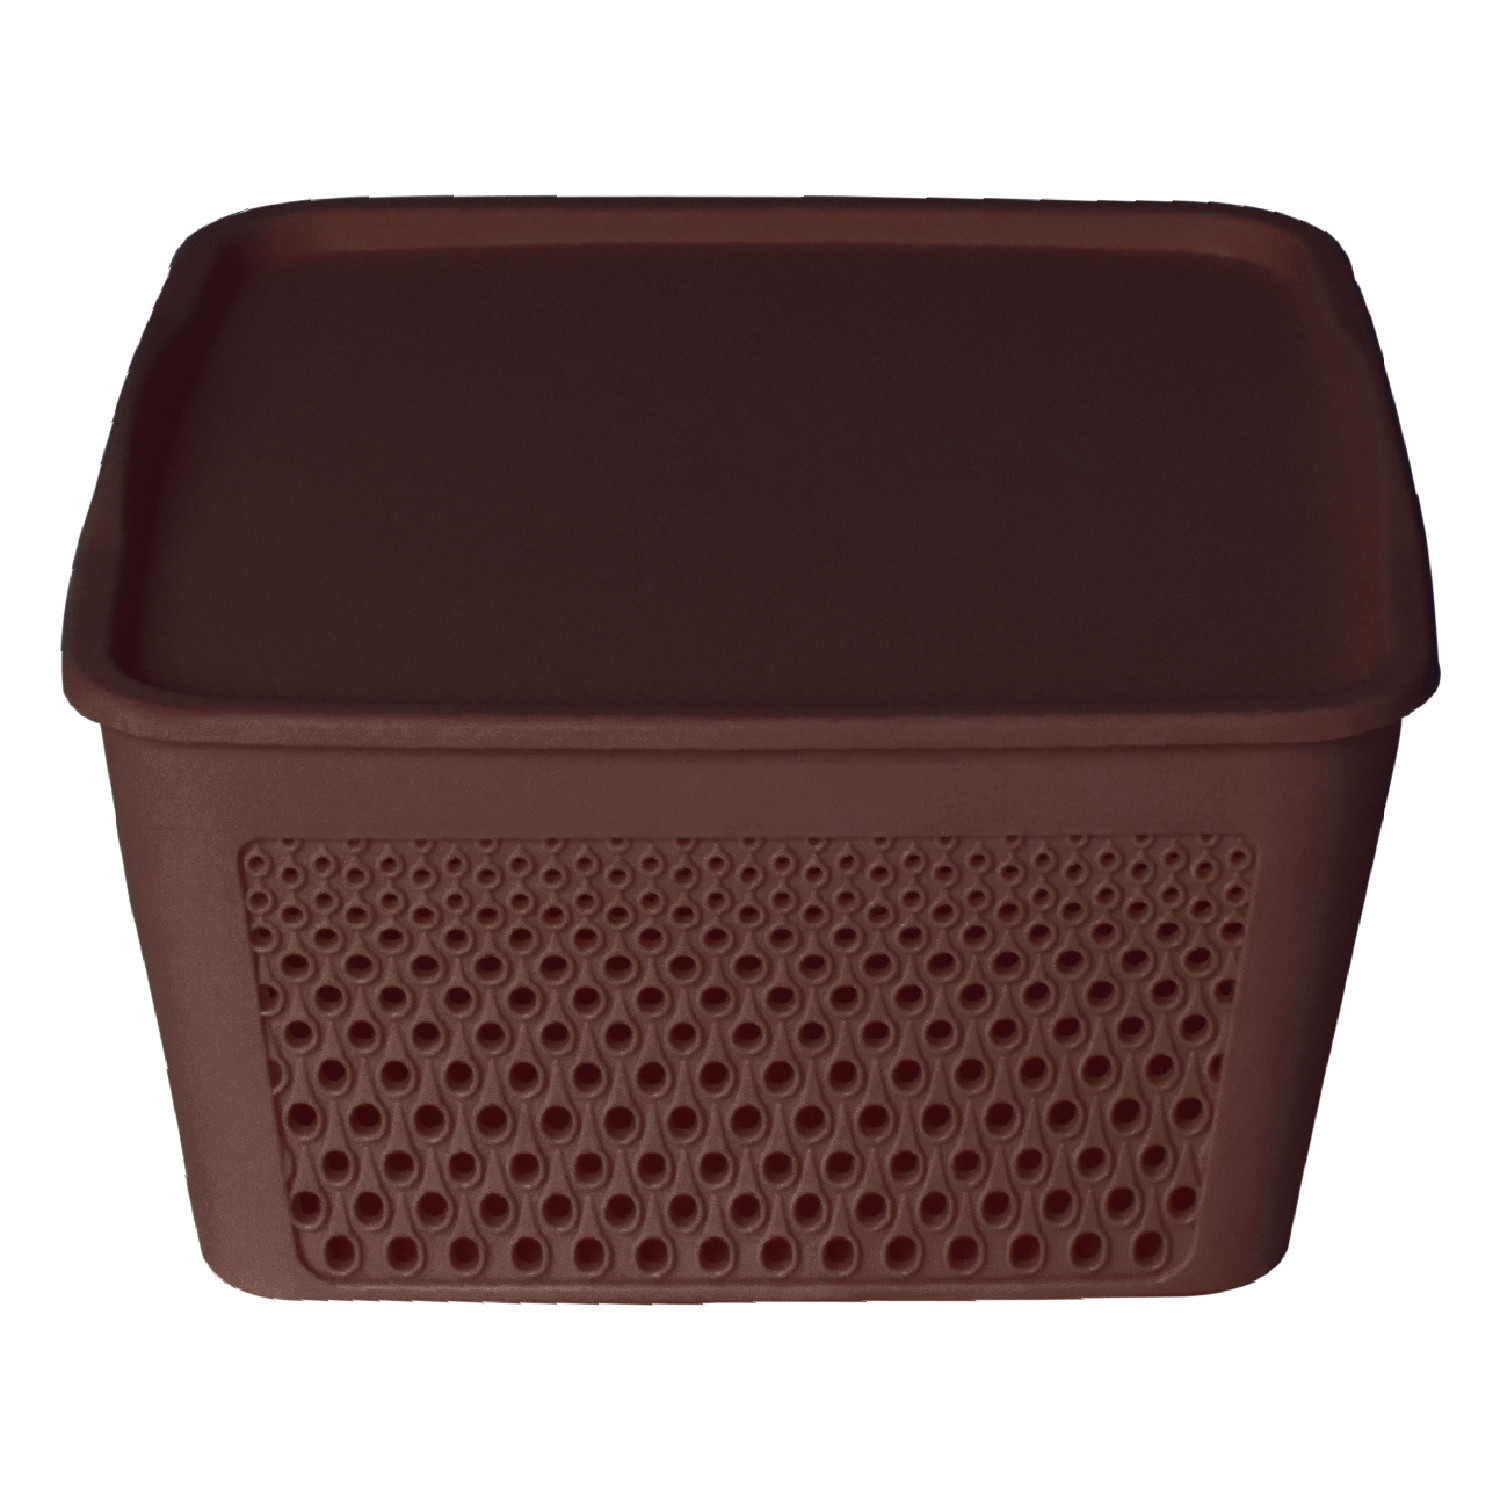 Kuber Industries Netted Design Unbreakable Multipurpose Square Shape Plastic Storage Baskets with lid Small Pack of 2 (Brown)